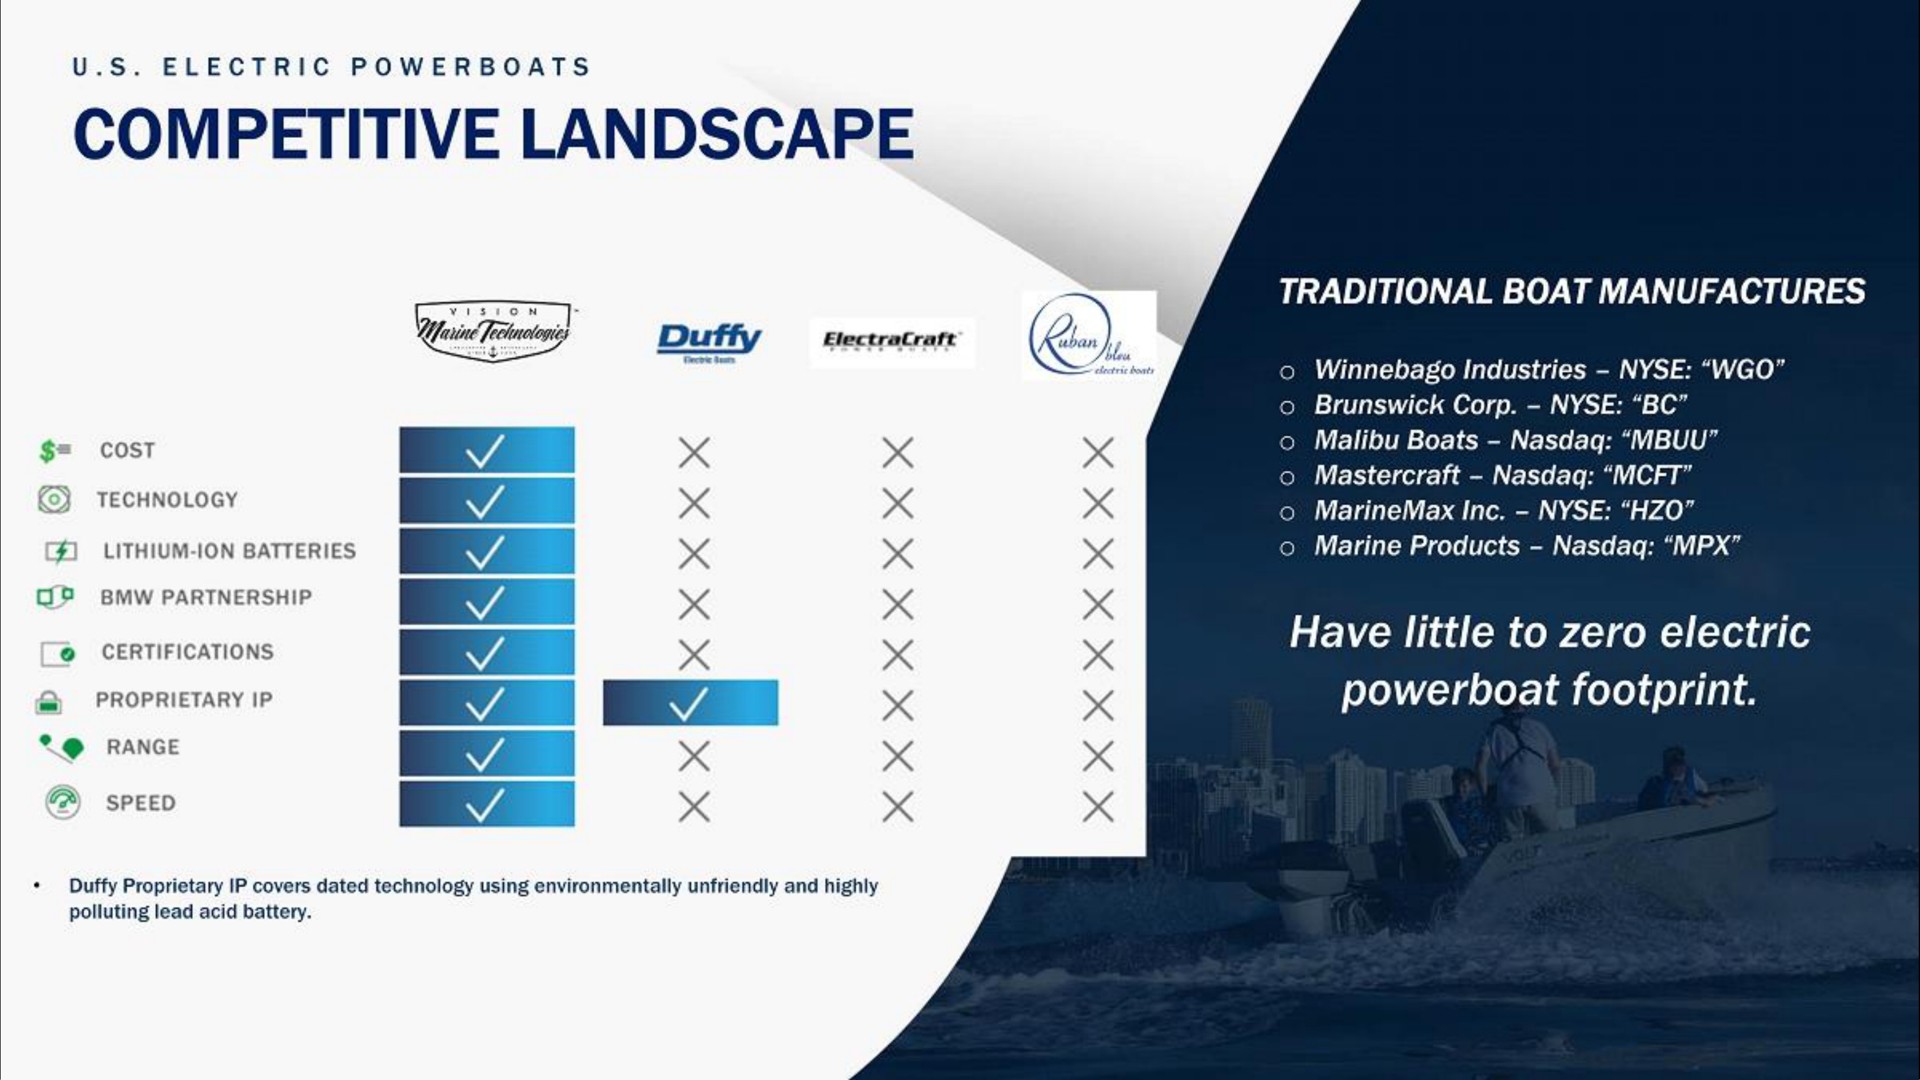 competitive landscape cost technology certifications proprietary speed traditional boat manufactures have little to zero electric powerboat footprint | Vision Marine Technologies